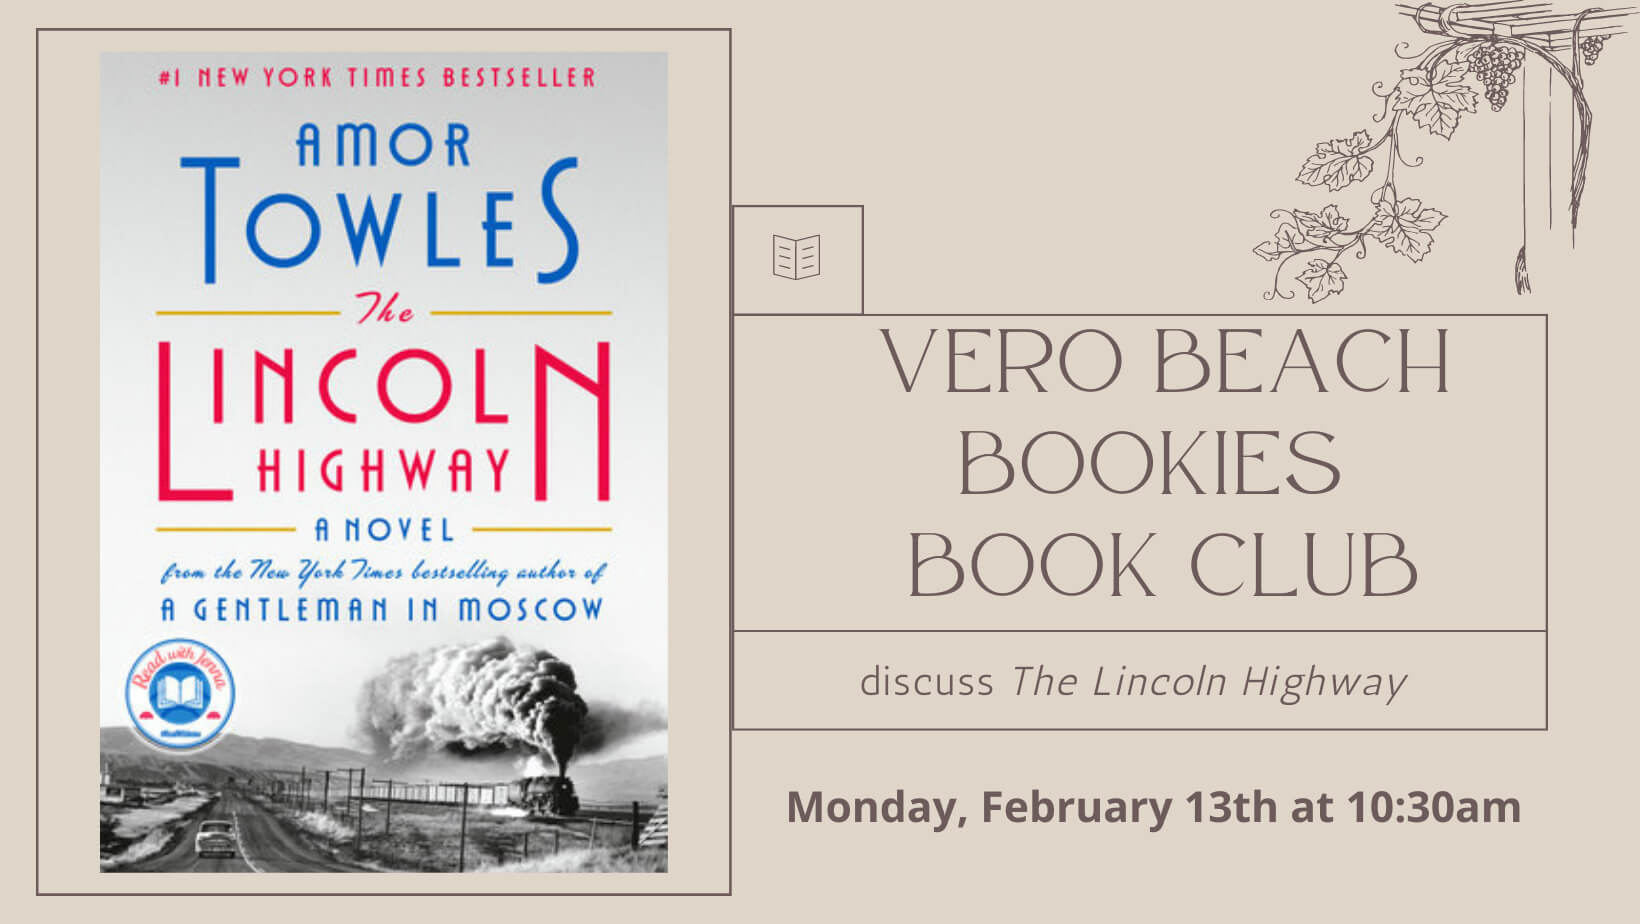 Vero Beach Book Club discusses The Lincoln Highway by Amor Towles